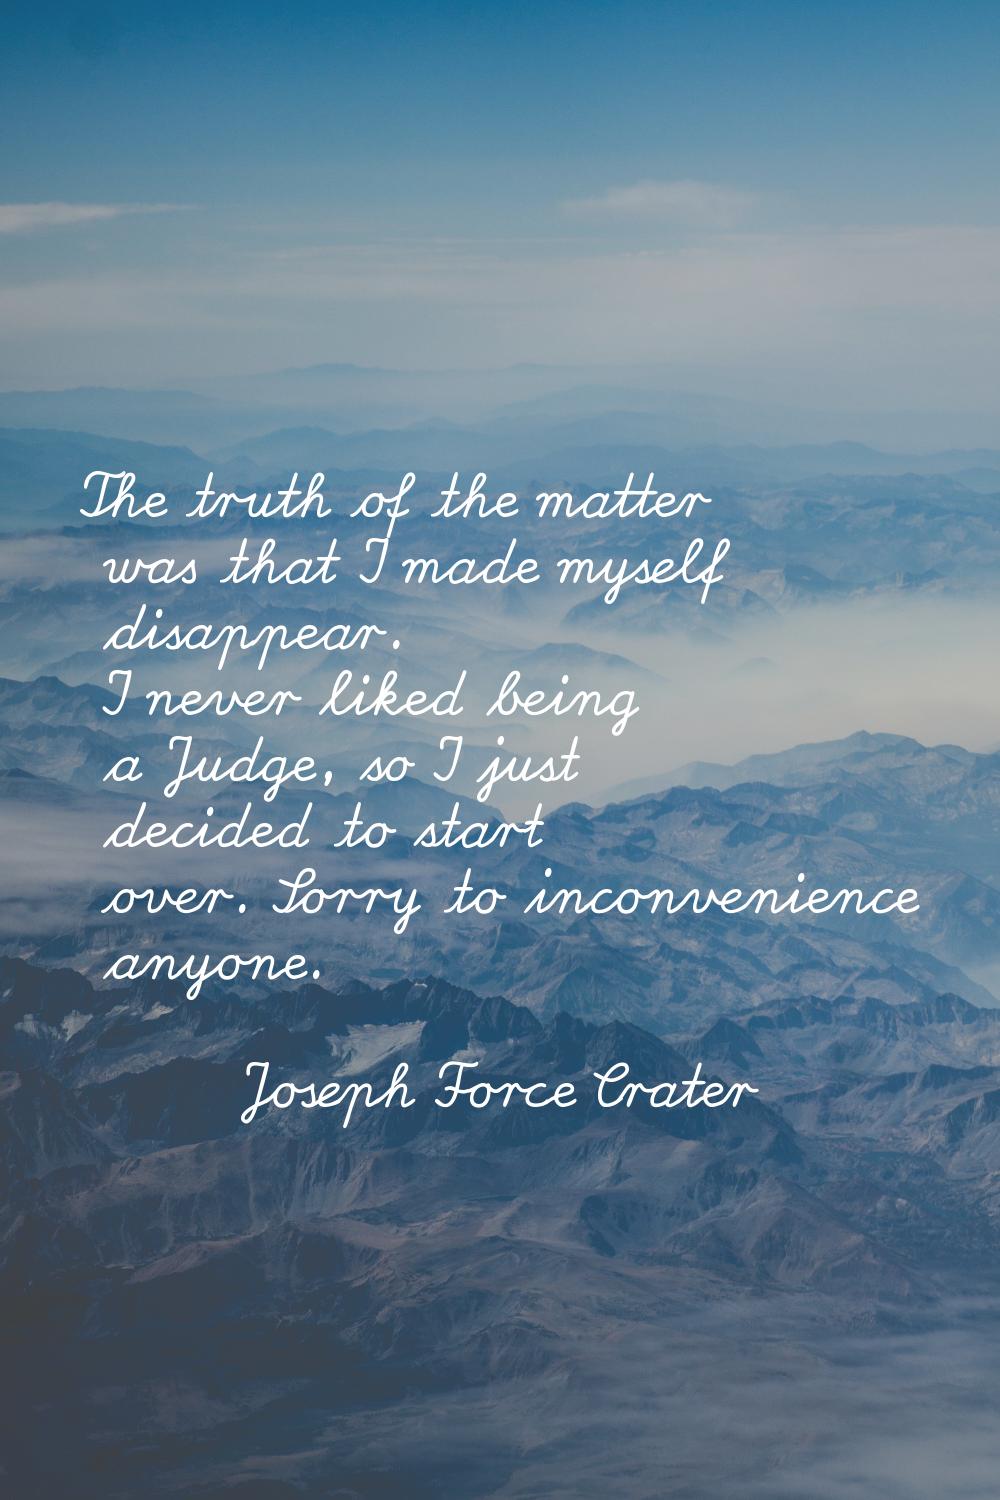 The truth of the matter was that I made myself disappear. I never liked being a Judge, so I just de